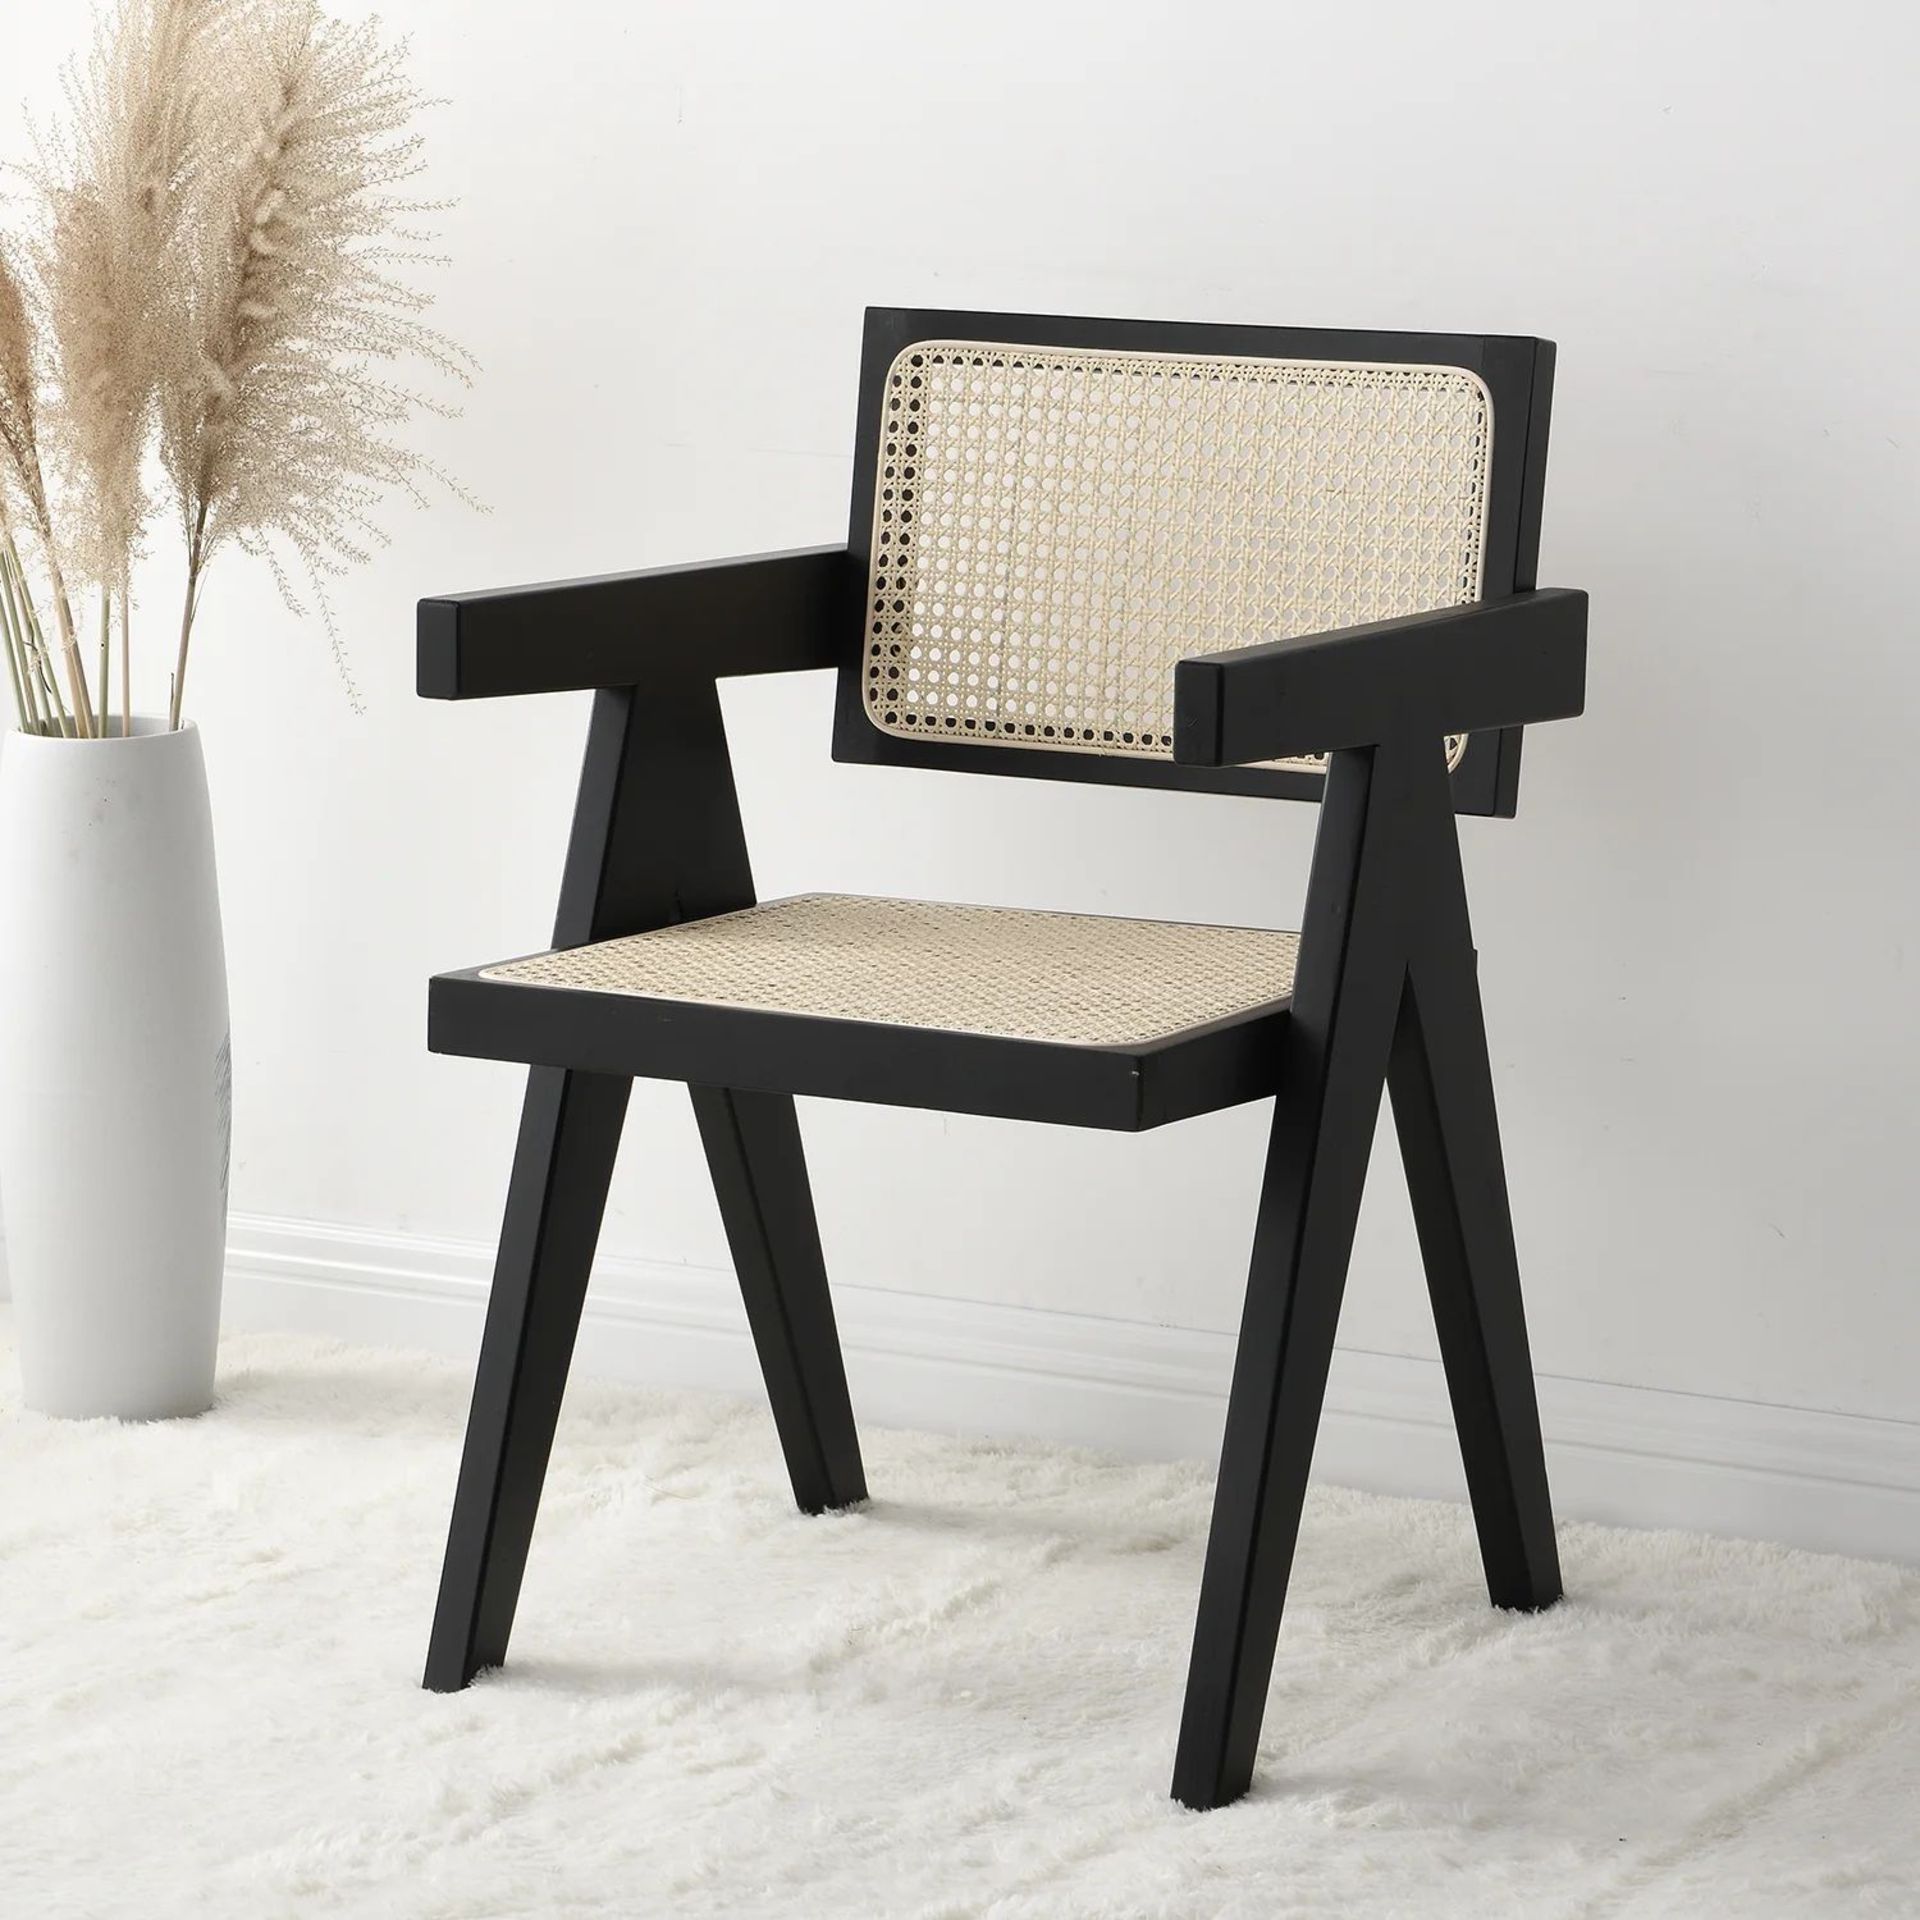 Jeanne Black Colour Cane Rattan Solid Beech Wood Dining Chair. - R19.6. RRP £239.99. The cane rattan